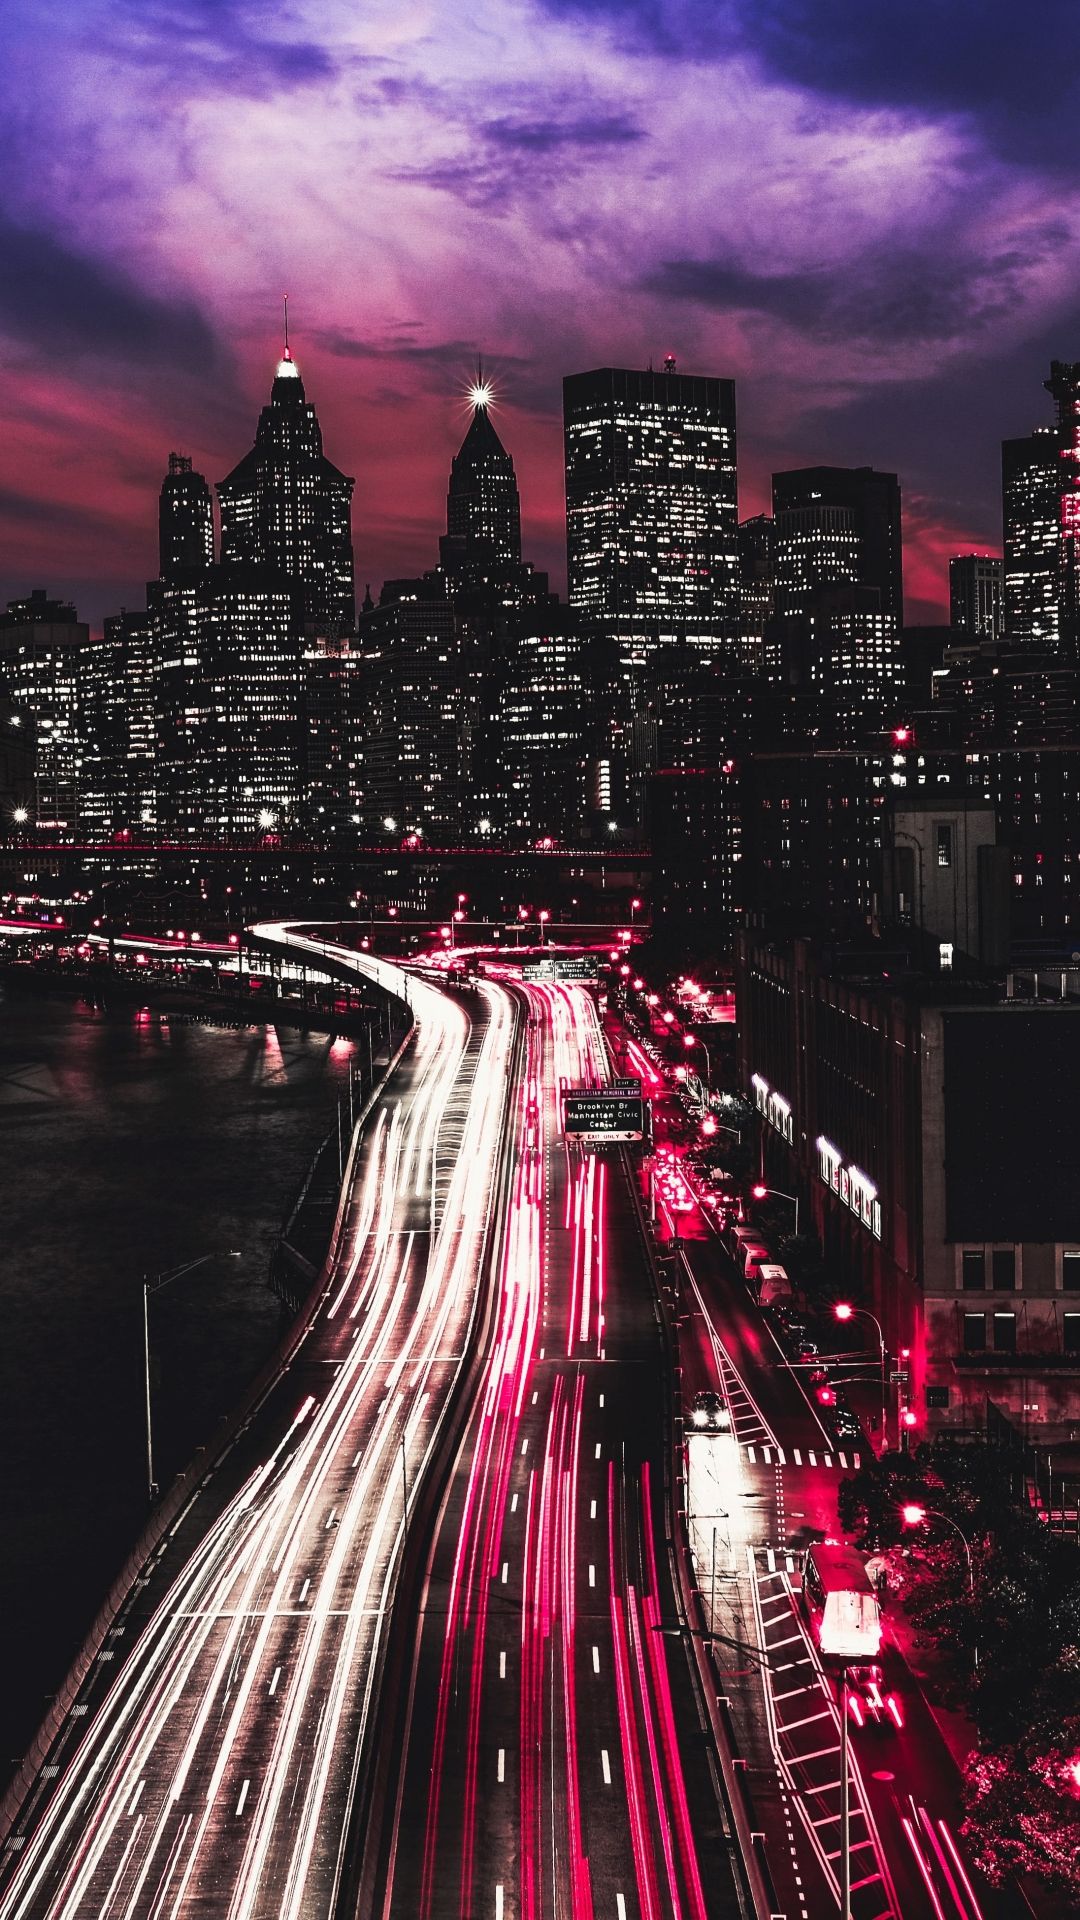 A city at night with a purple sky - New York